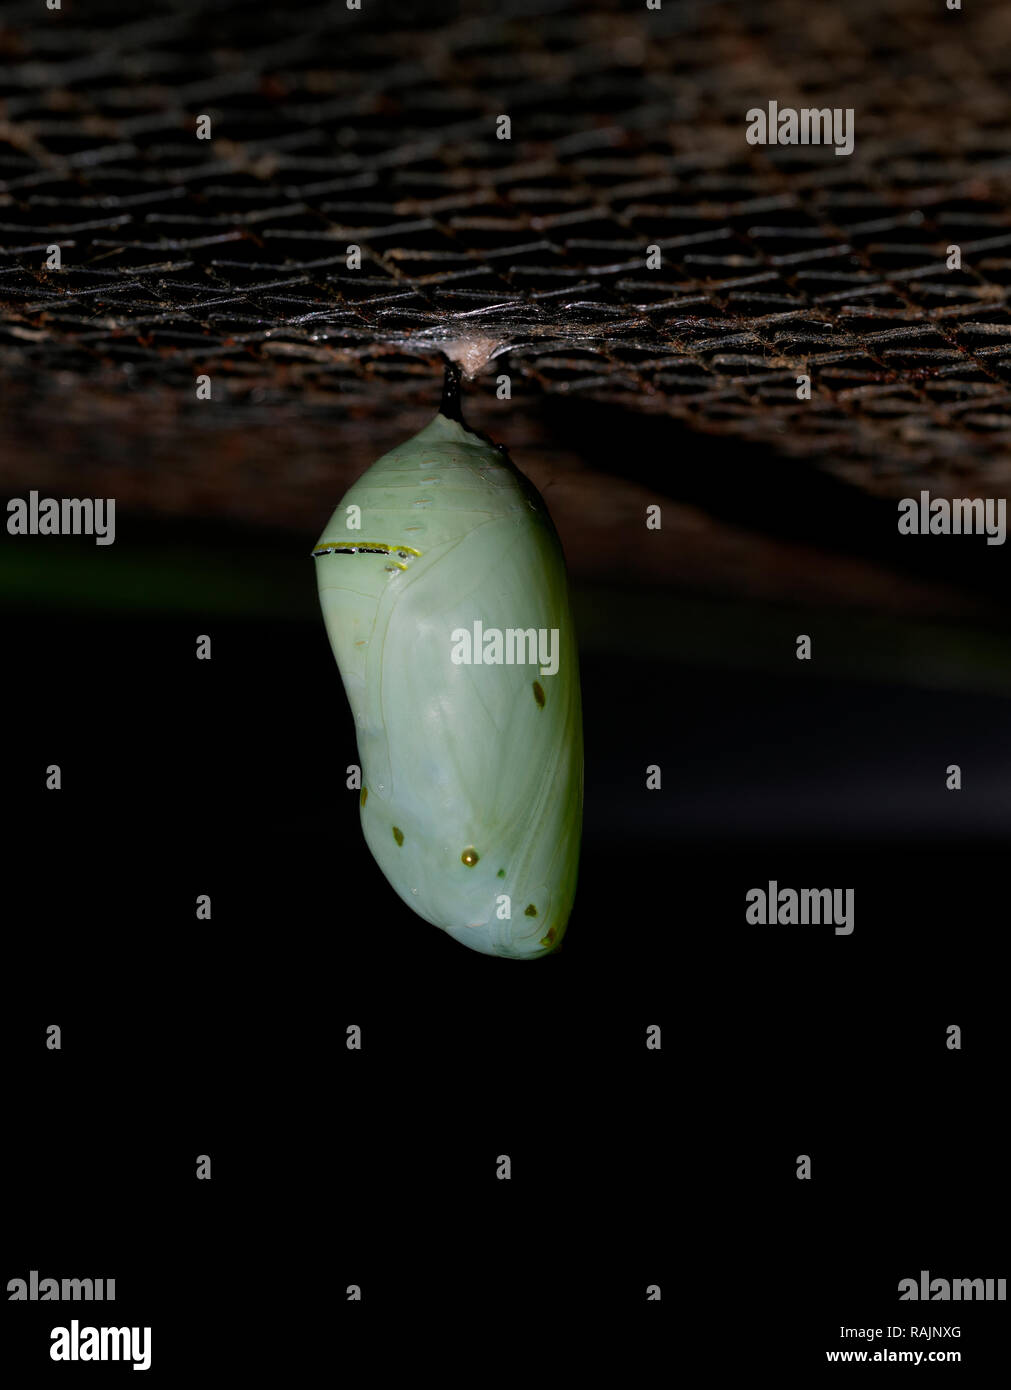 The Chrysalis of a Monarch Butterfly. The butterfly is close to emerging. Stock Photo